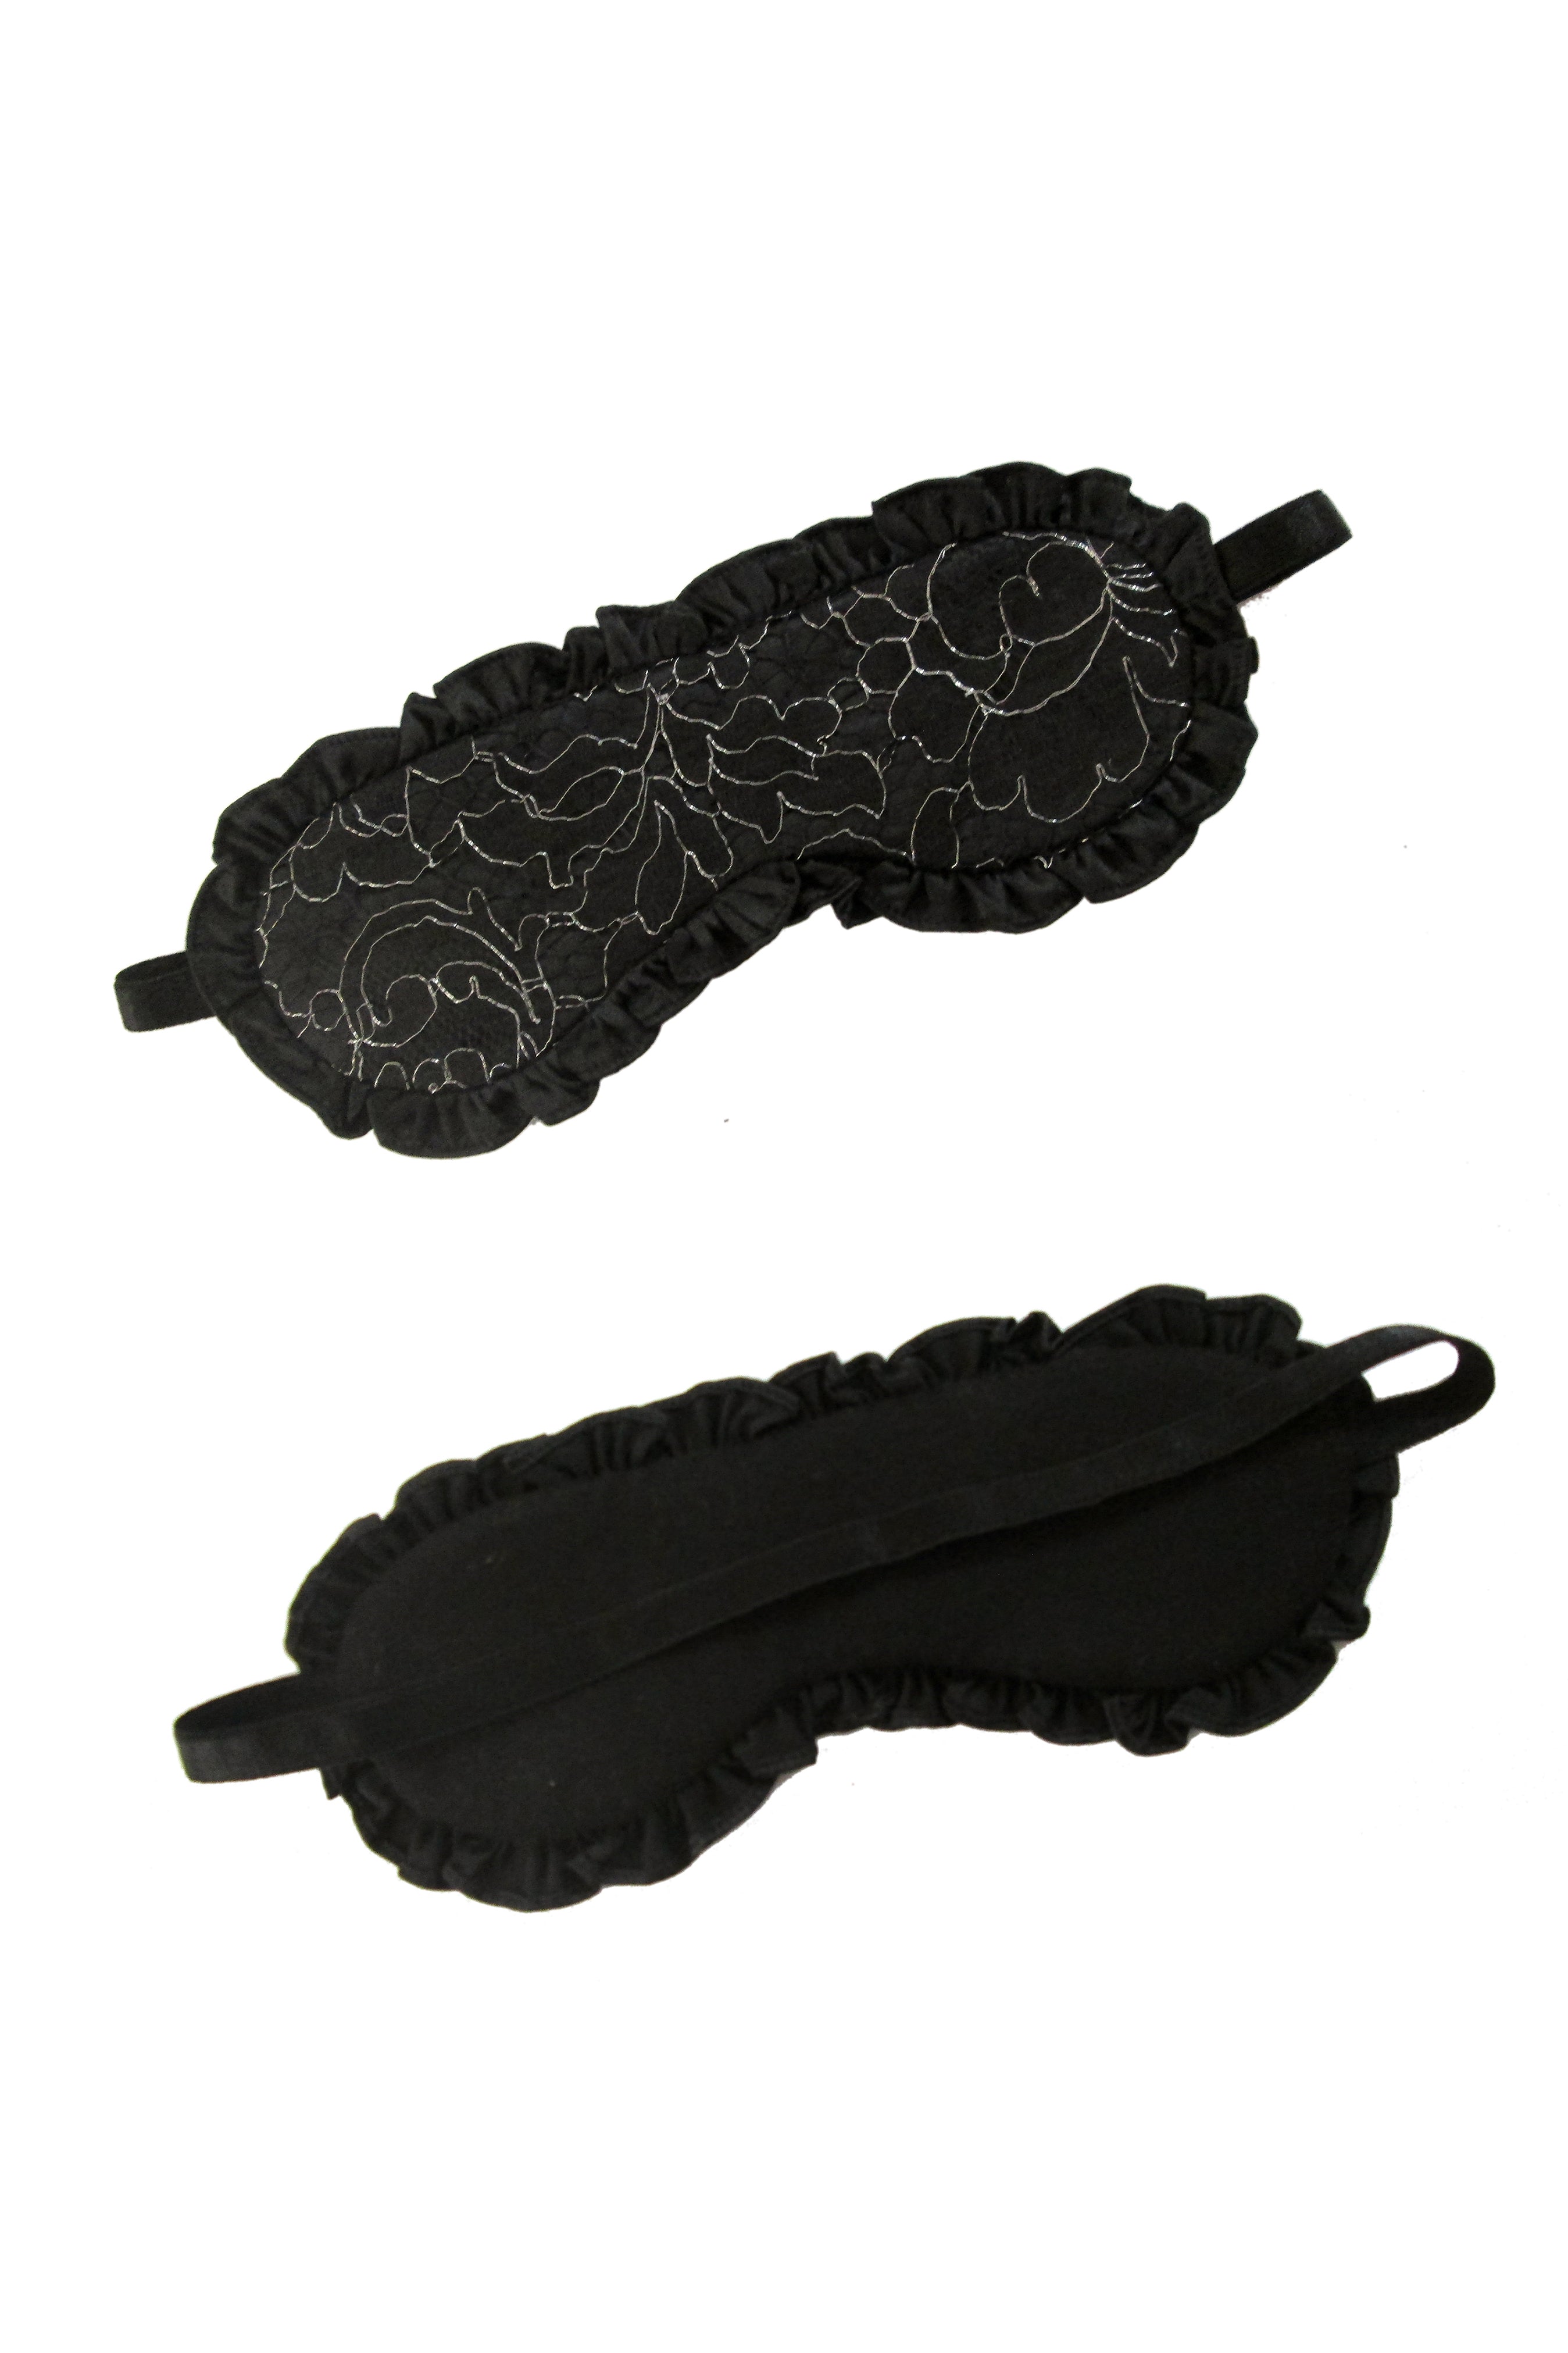 100% silk sleep mask gift with black and silver lace